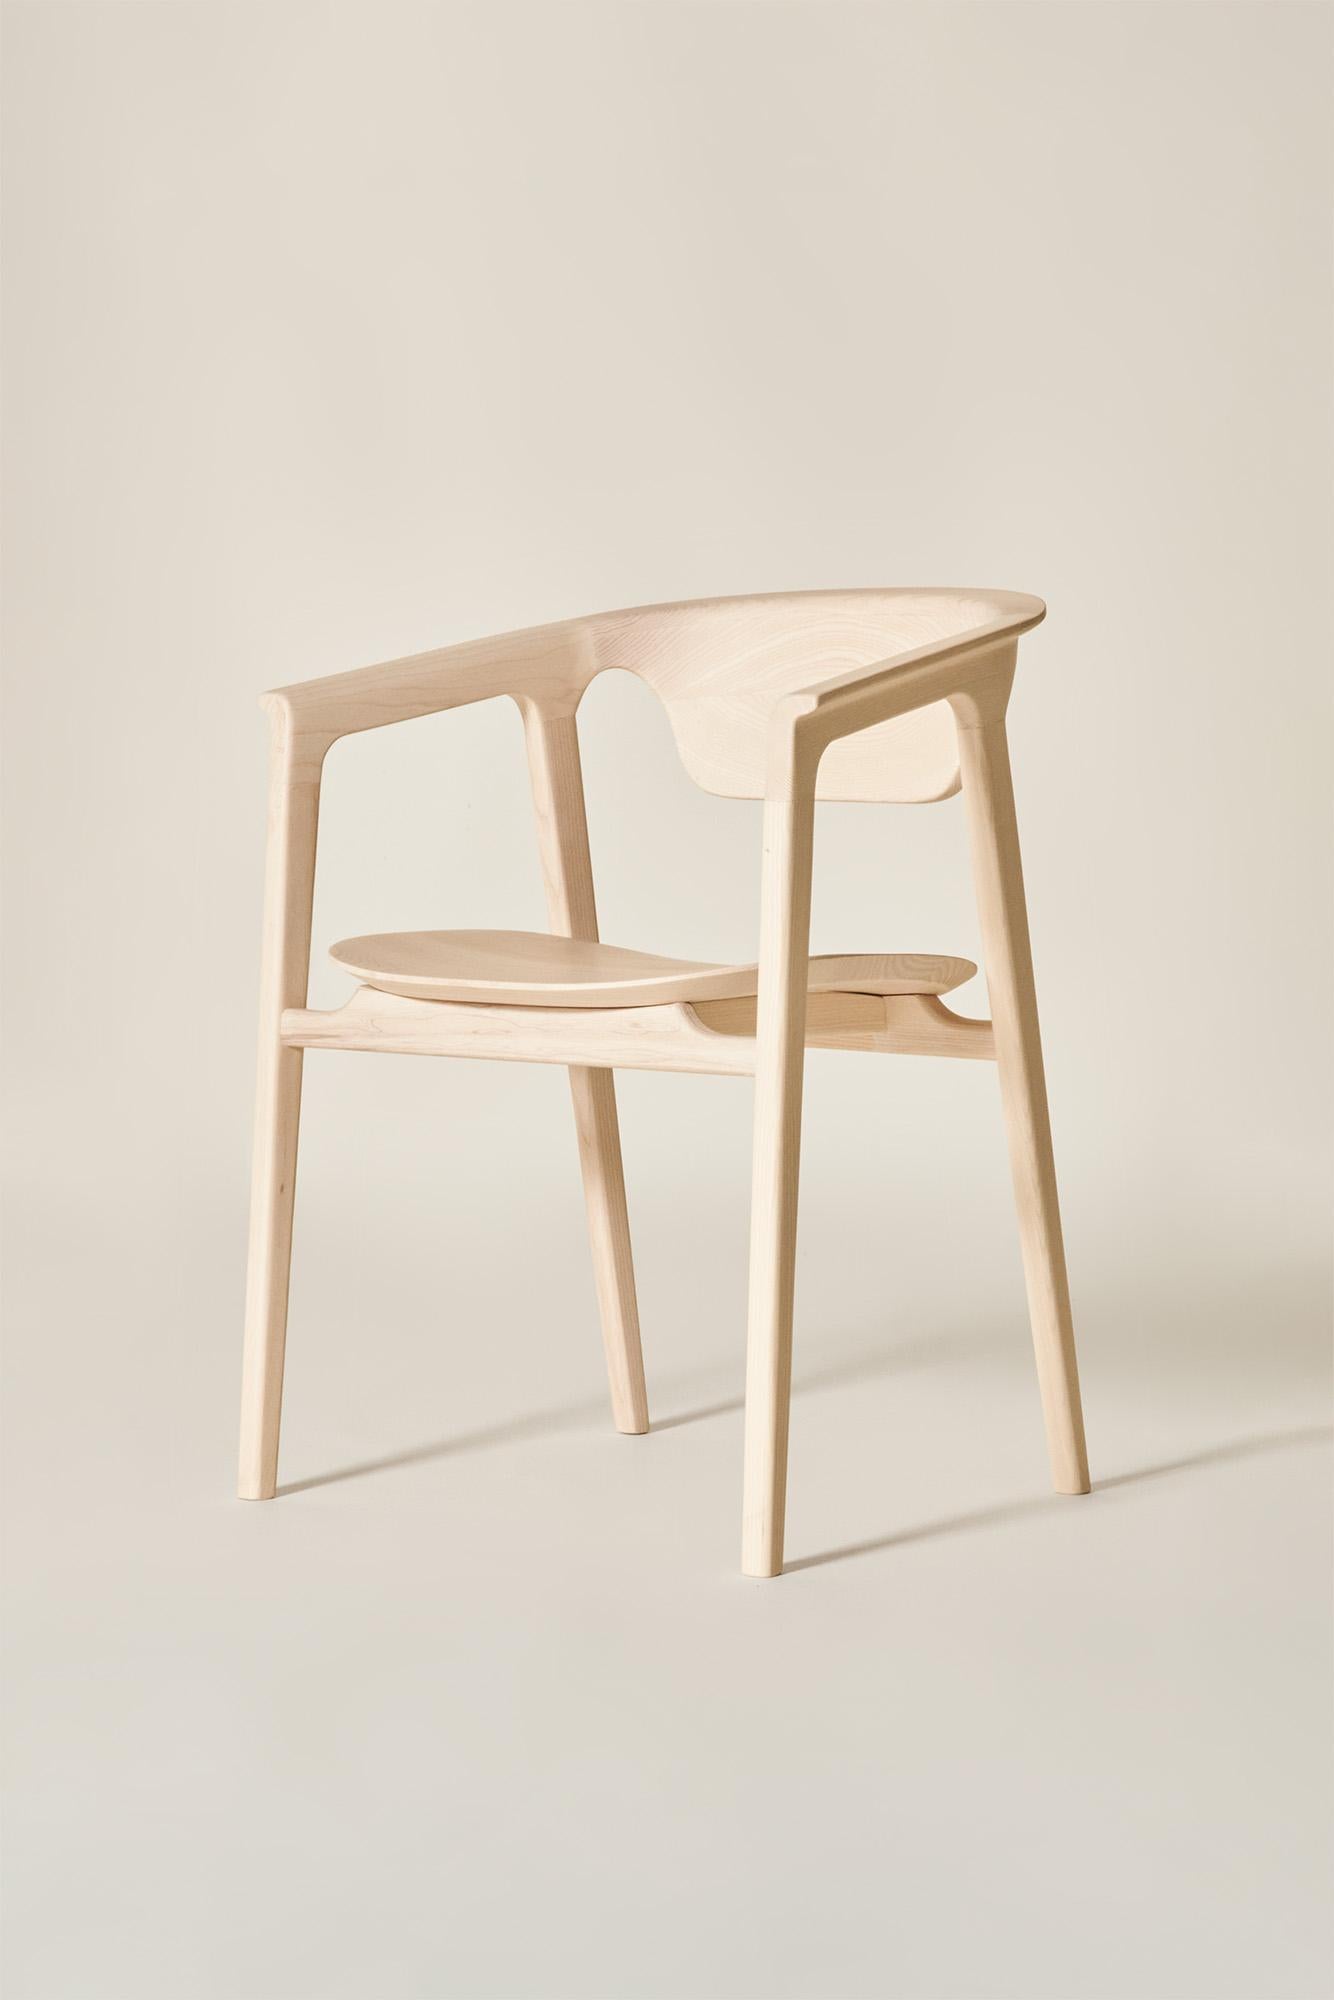 Duna Solid Wood Chair, Ash in Handmade Natural Finish, Contemporary In New Condition For Sale In Cadeglioppi de Oppeano, VR